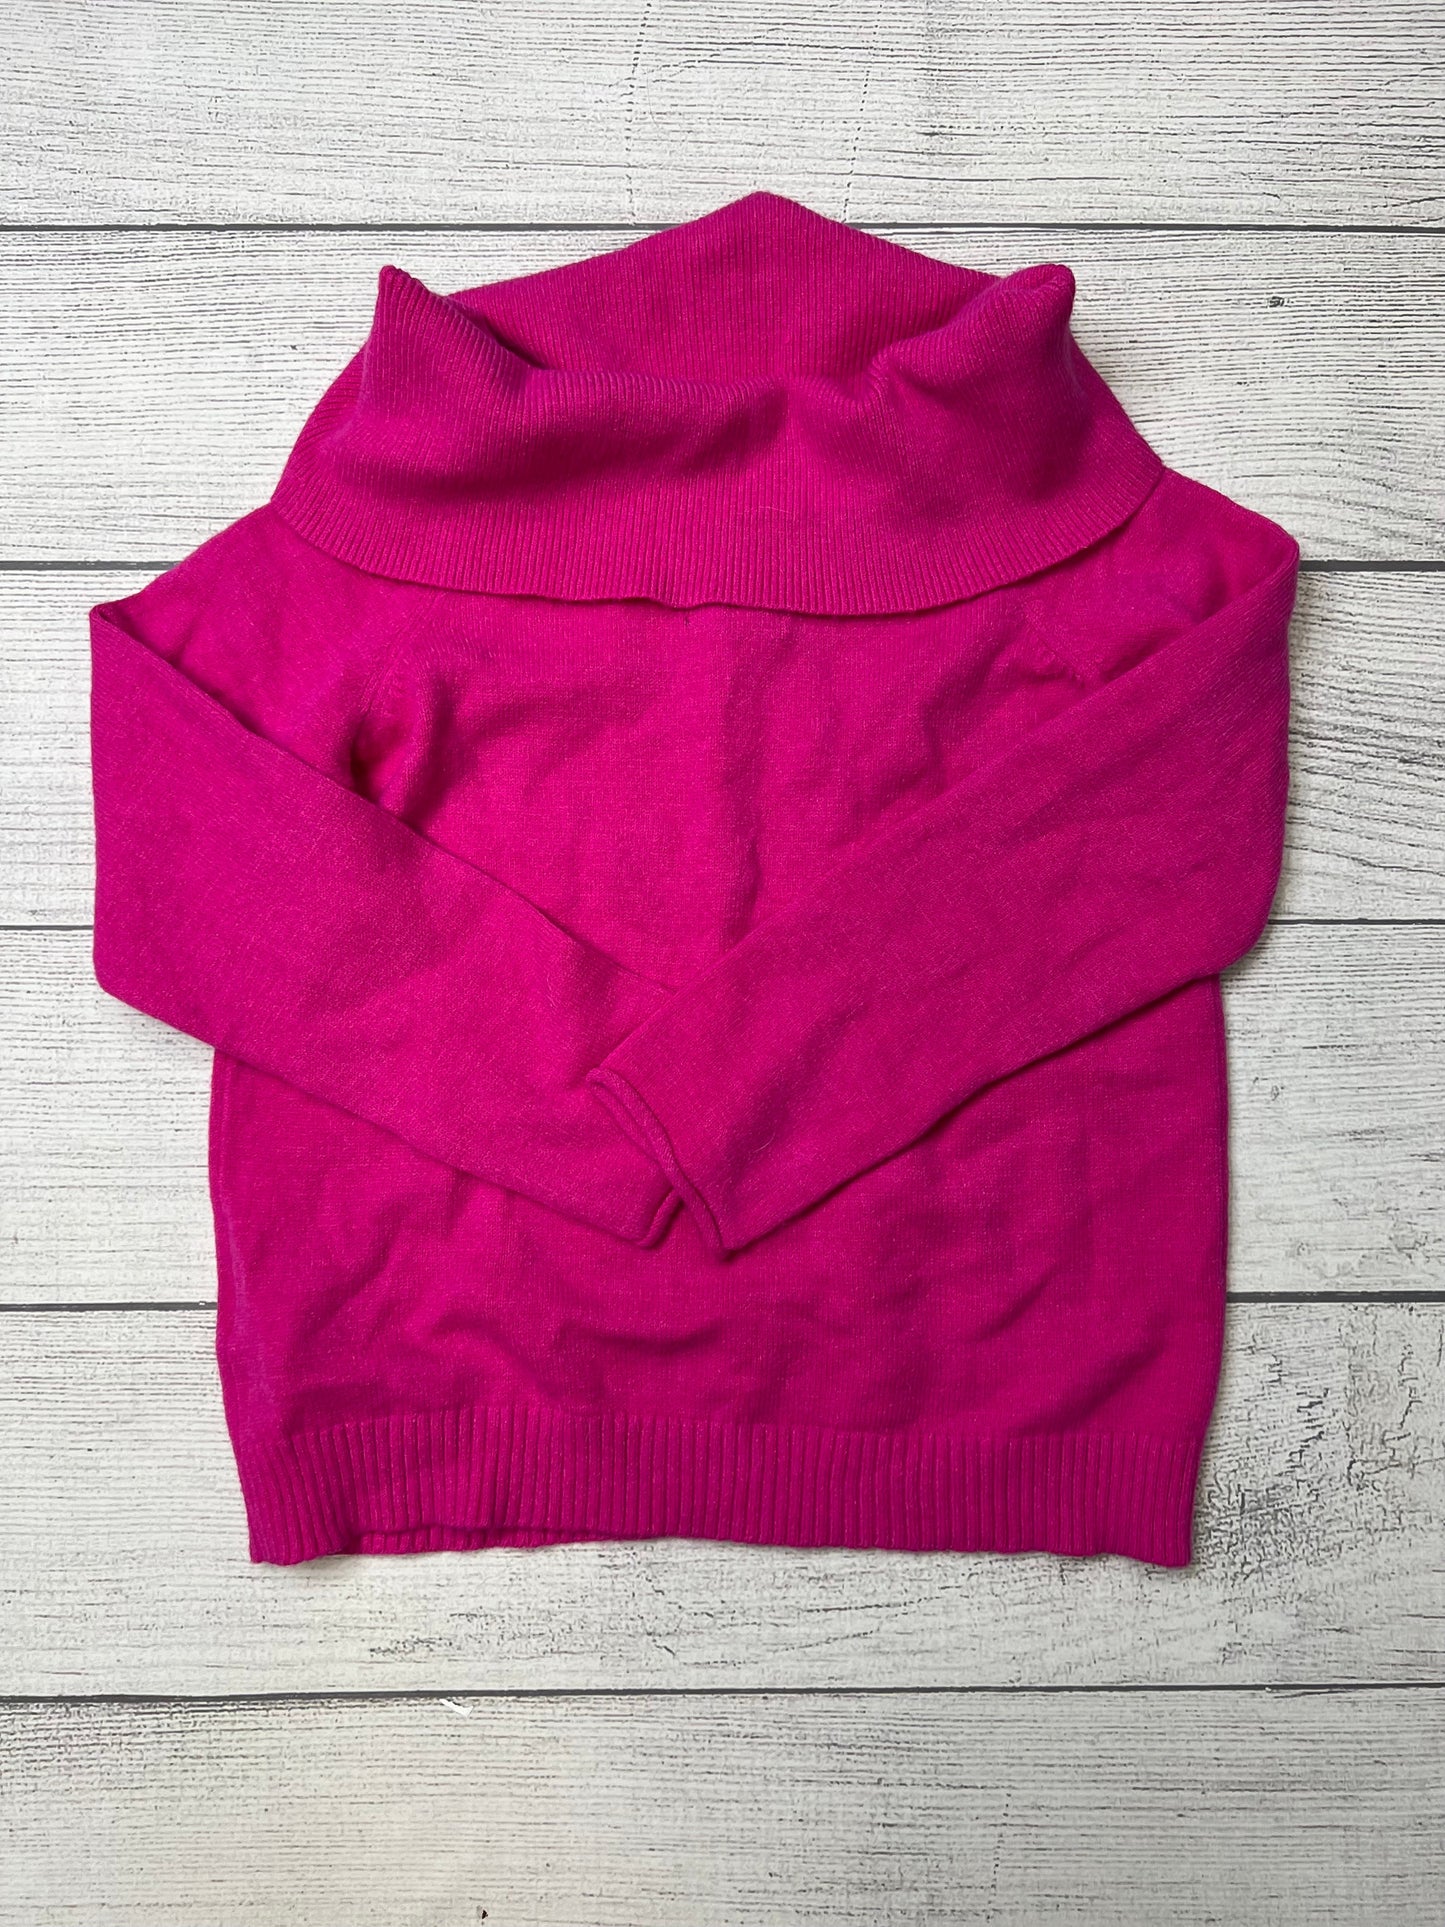 New! Sweater By Anthropologie  Size: M